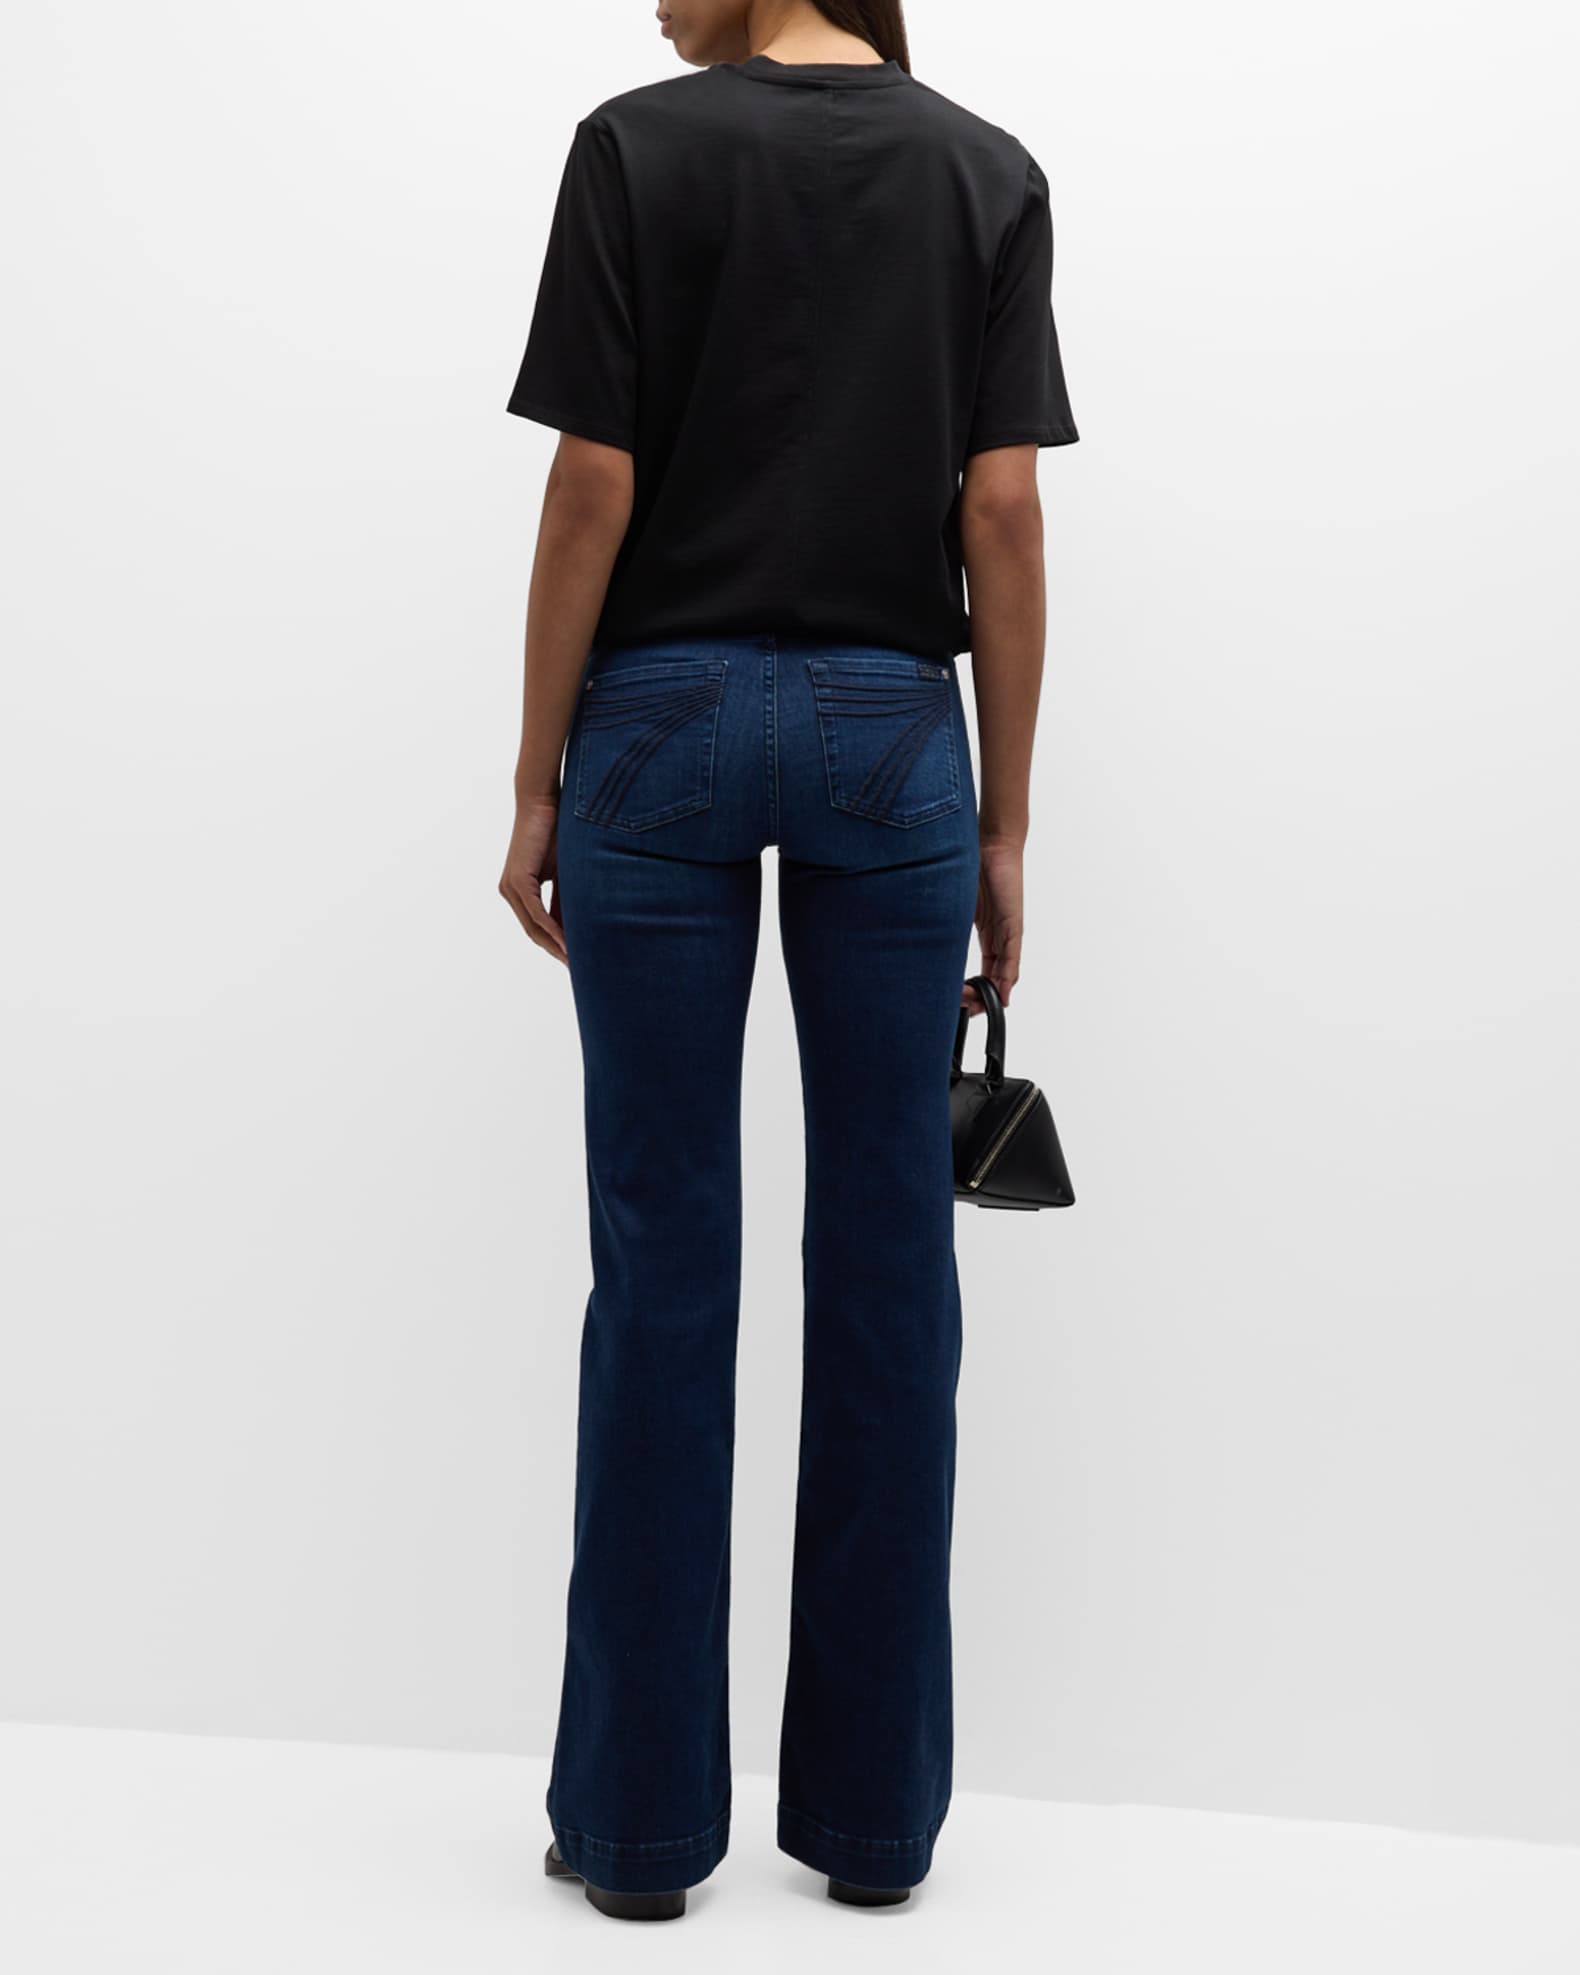 7 for all mankind Dojo Flare Jeans | Neiman Marcus